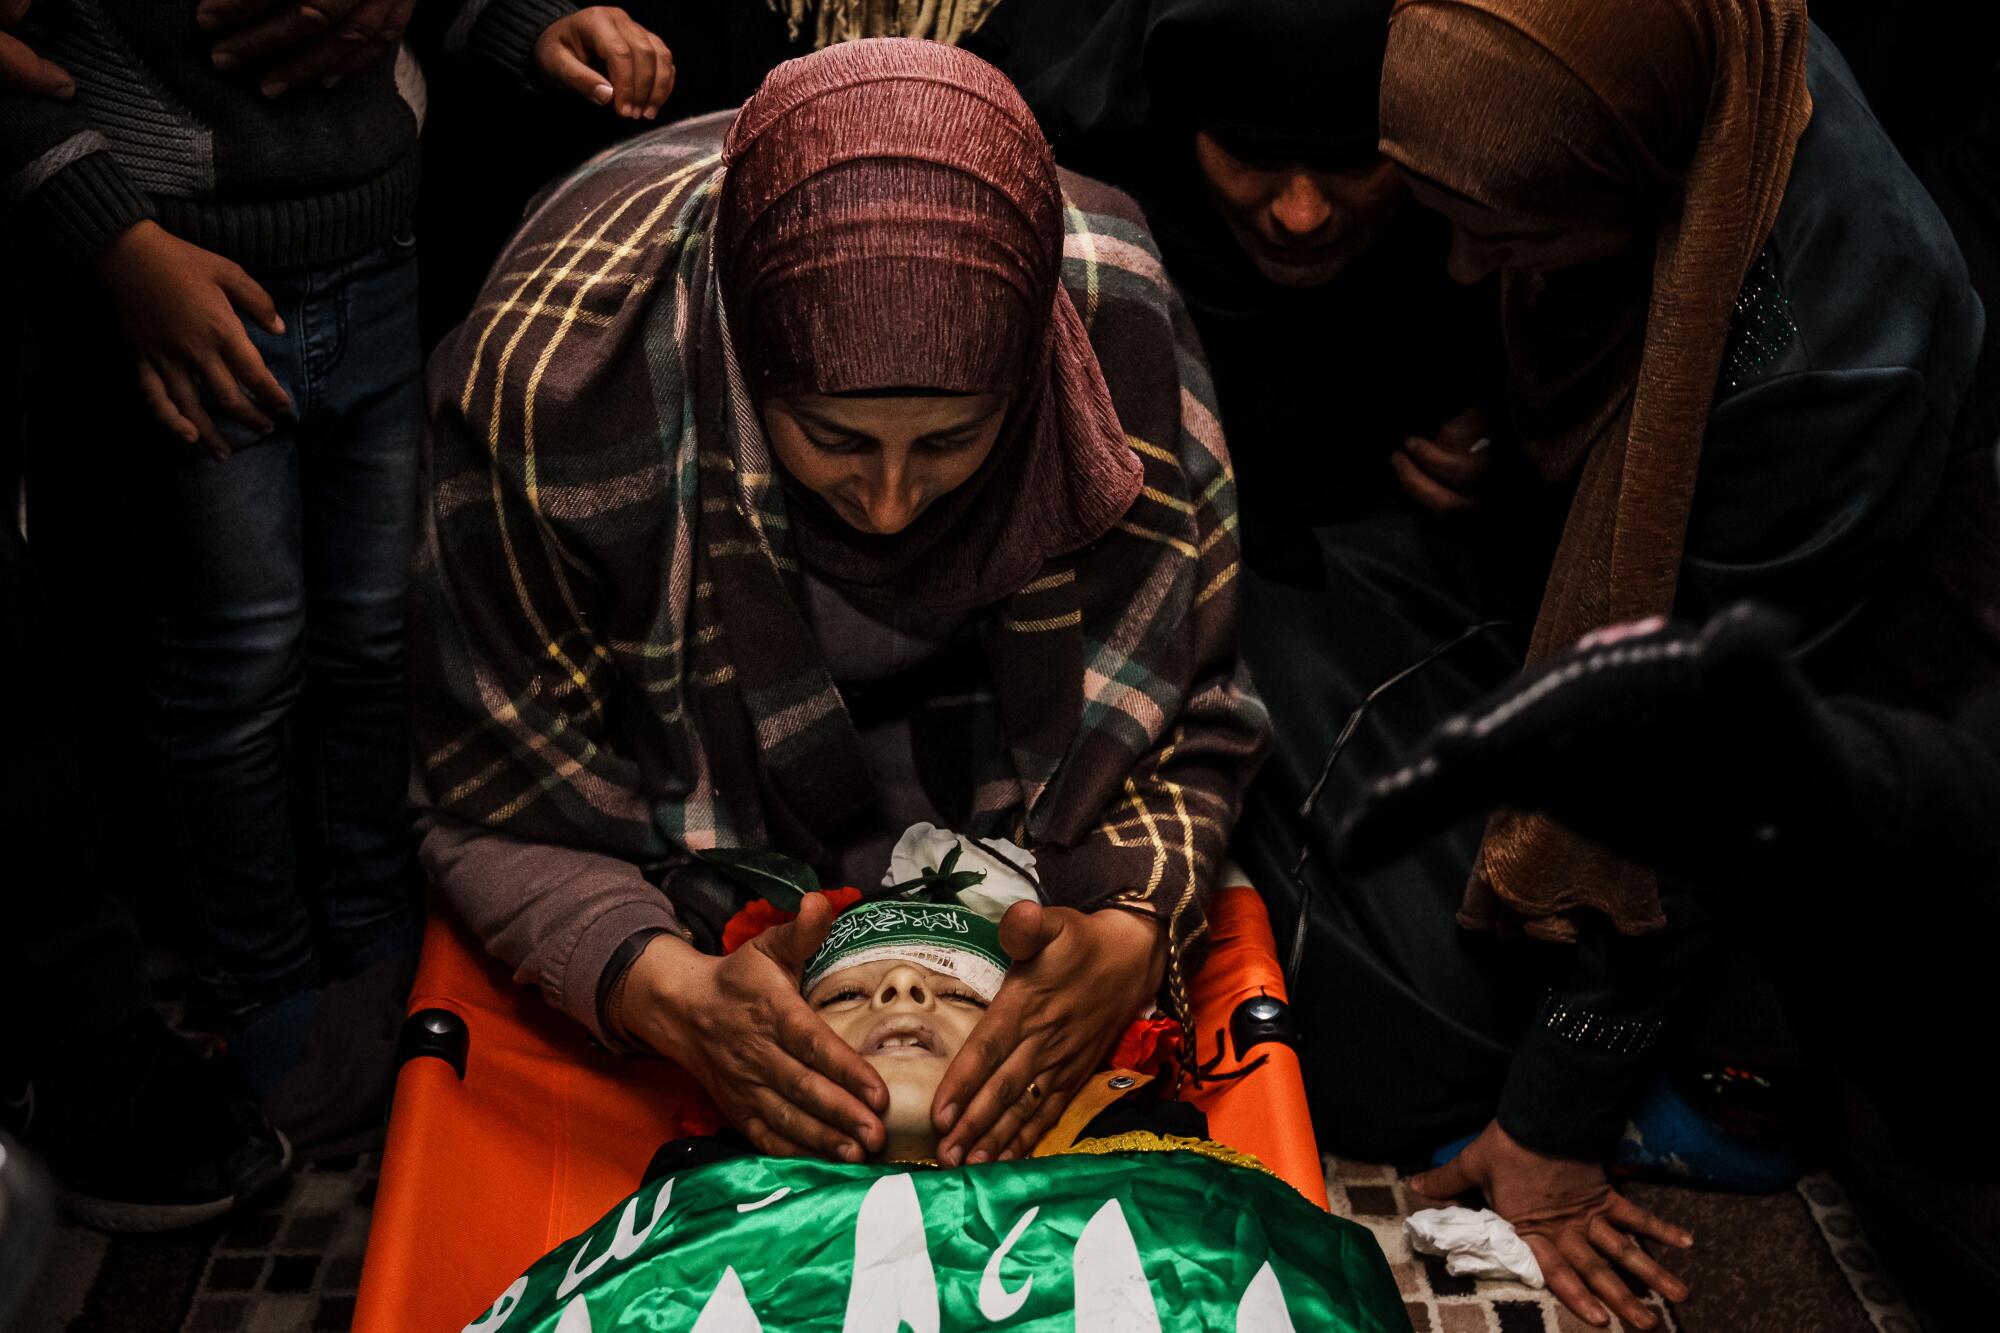 Salam Najjar puts her hands on her son's cheeks and bends over him during his funeral.